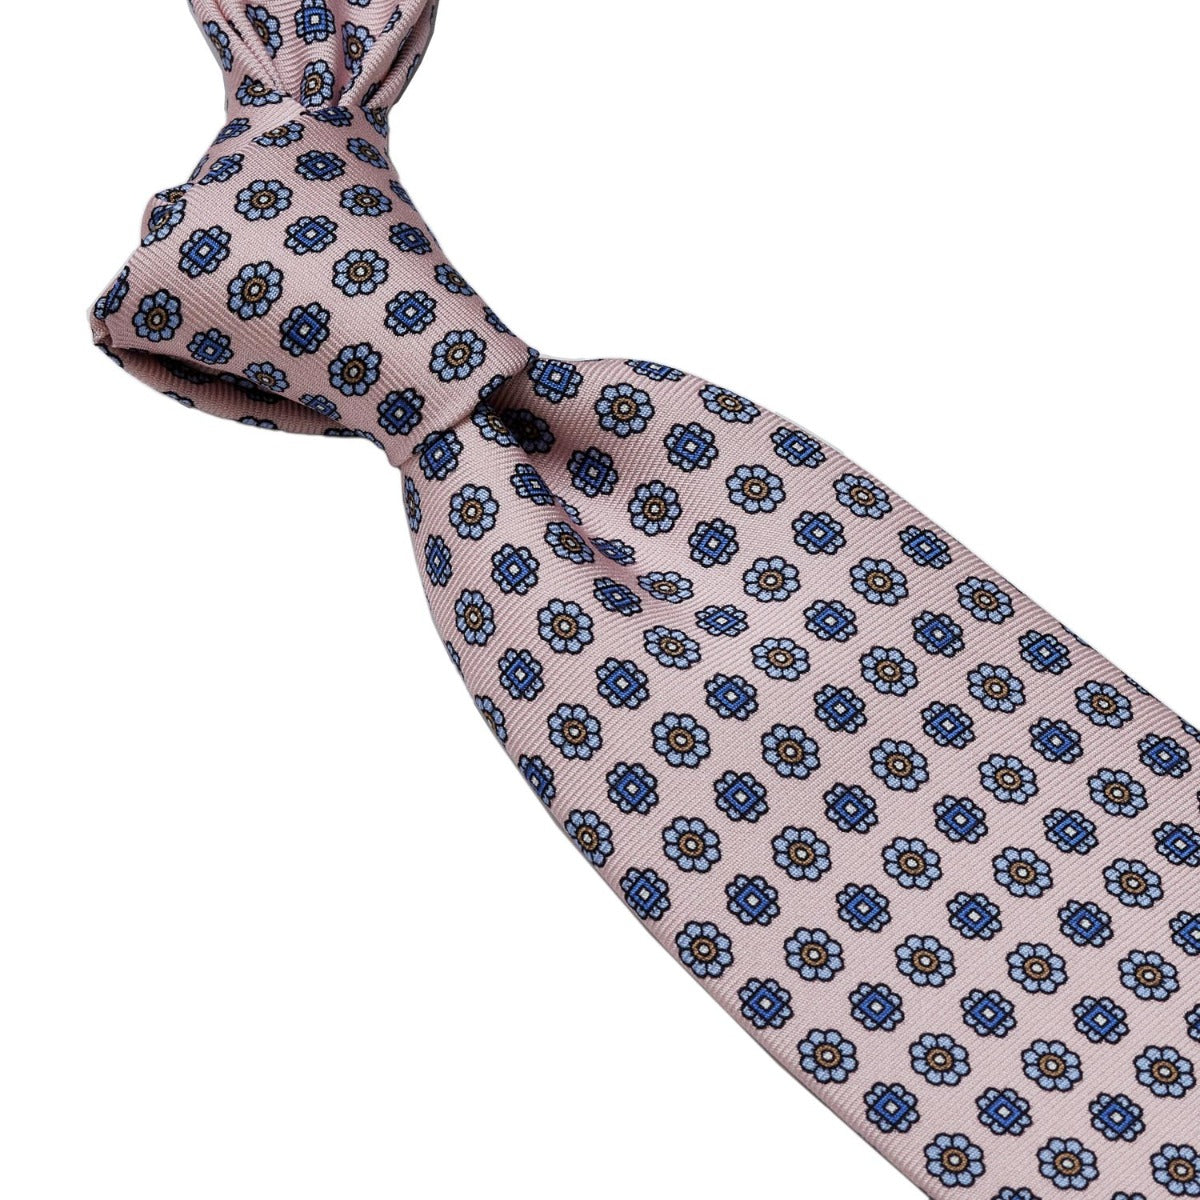 A Sovereign Grade Pink Floral 36oz Printed Silk Tie by KirbyAllison.com designed for longevity and quality.